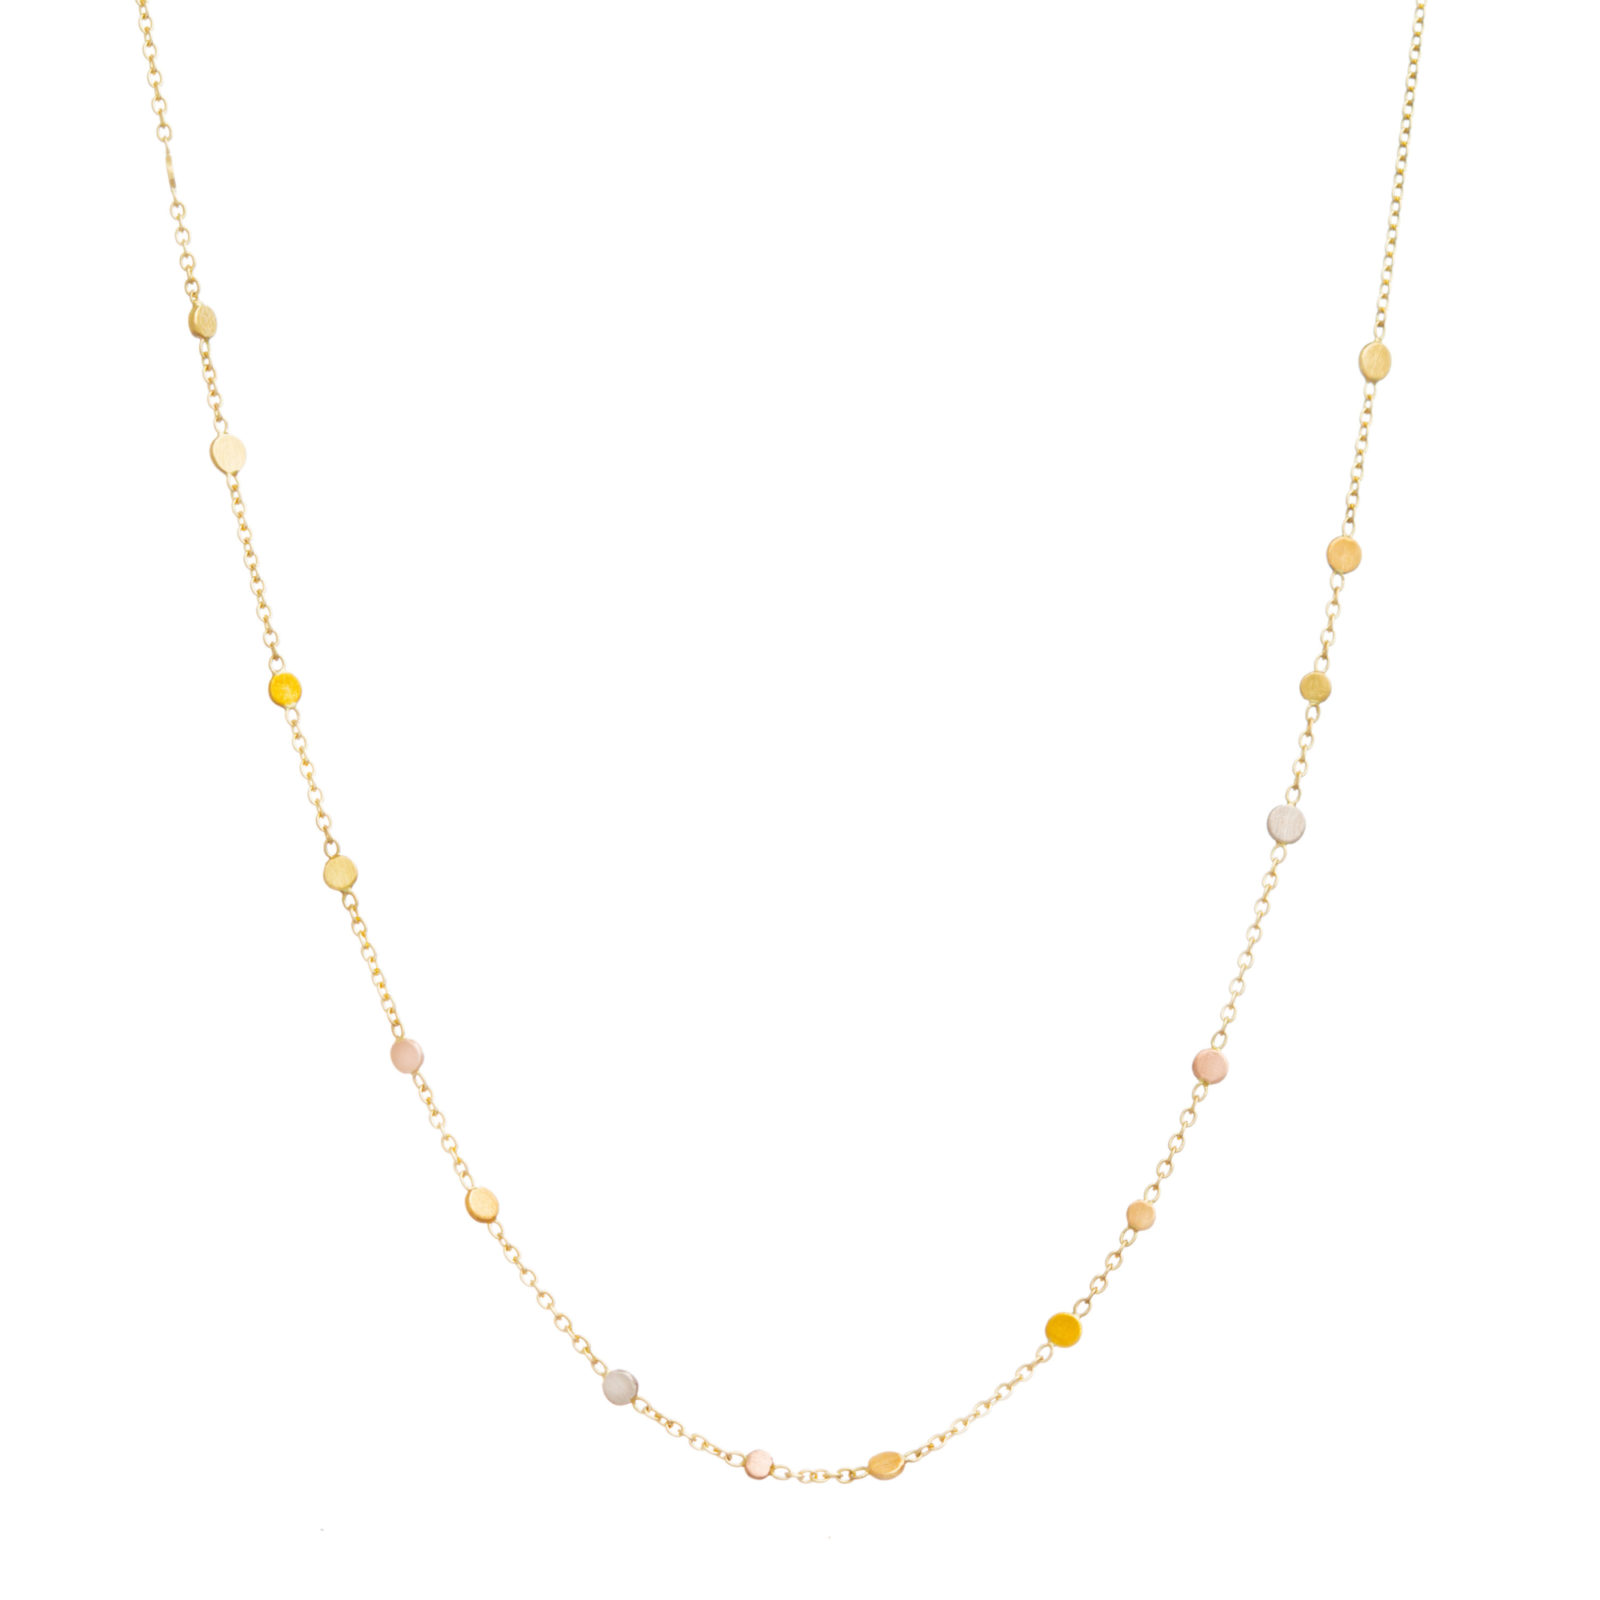 Sia Taylor SN6 RAIN Rainbow Gold Scattered Dust Necklace WB